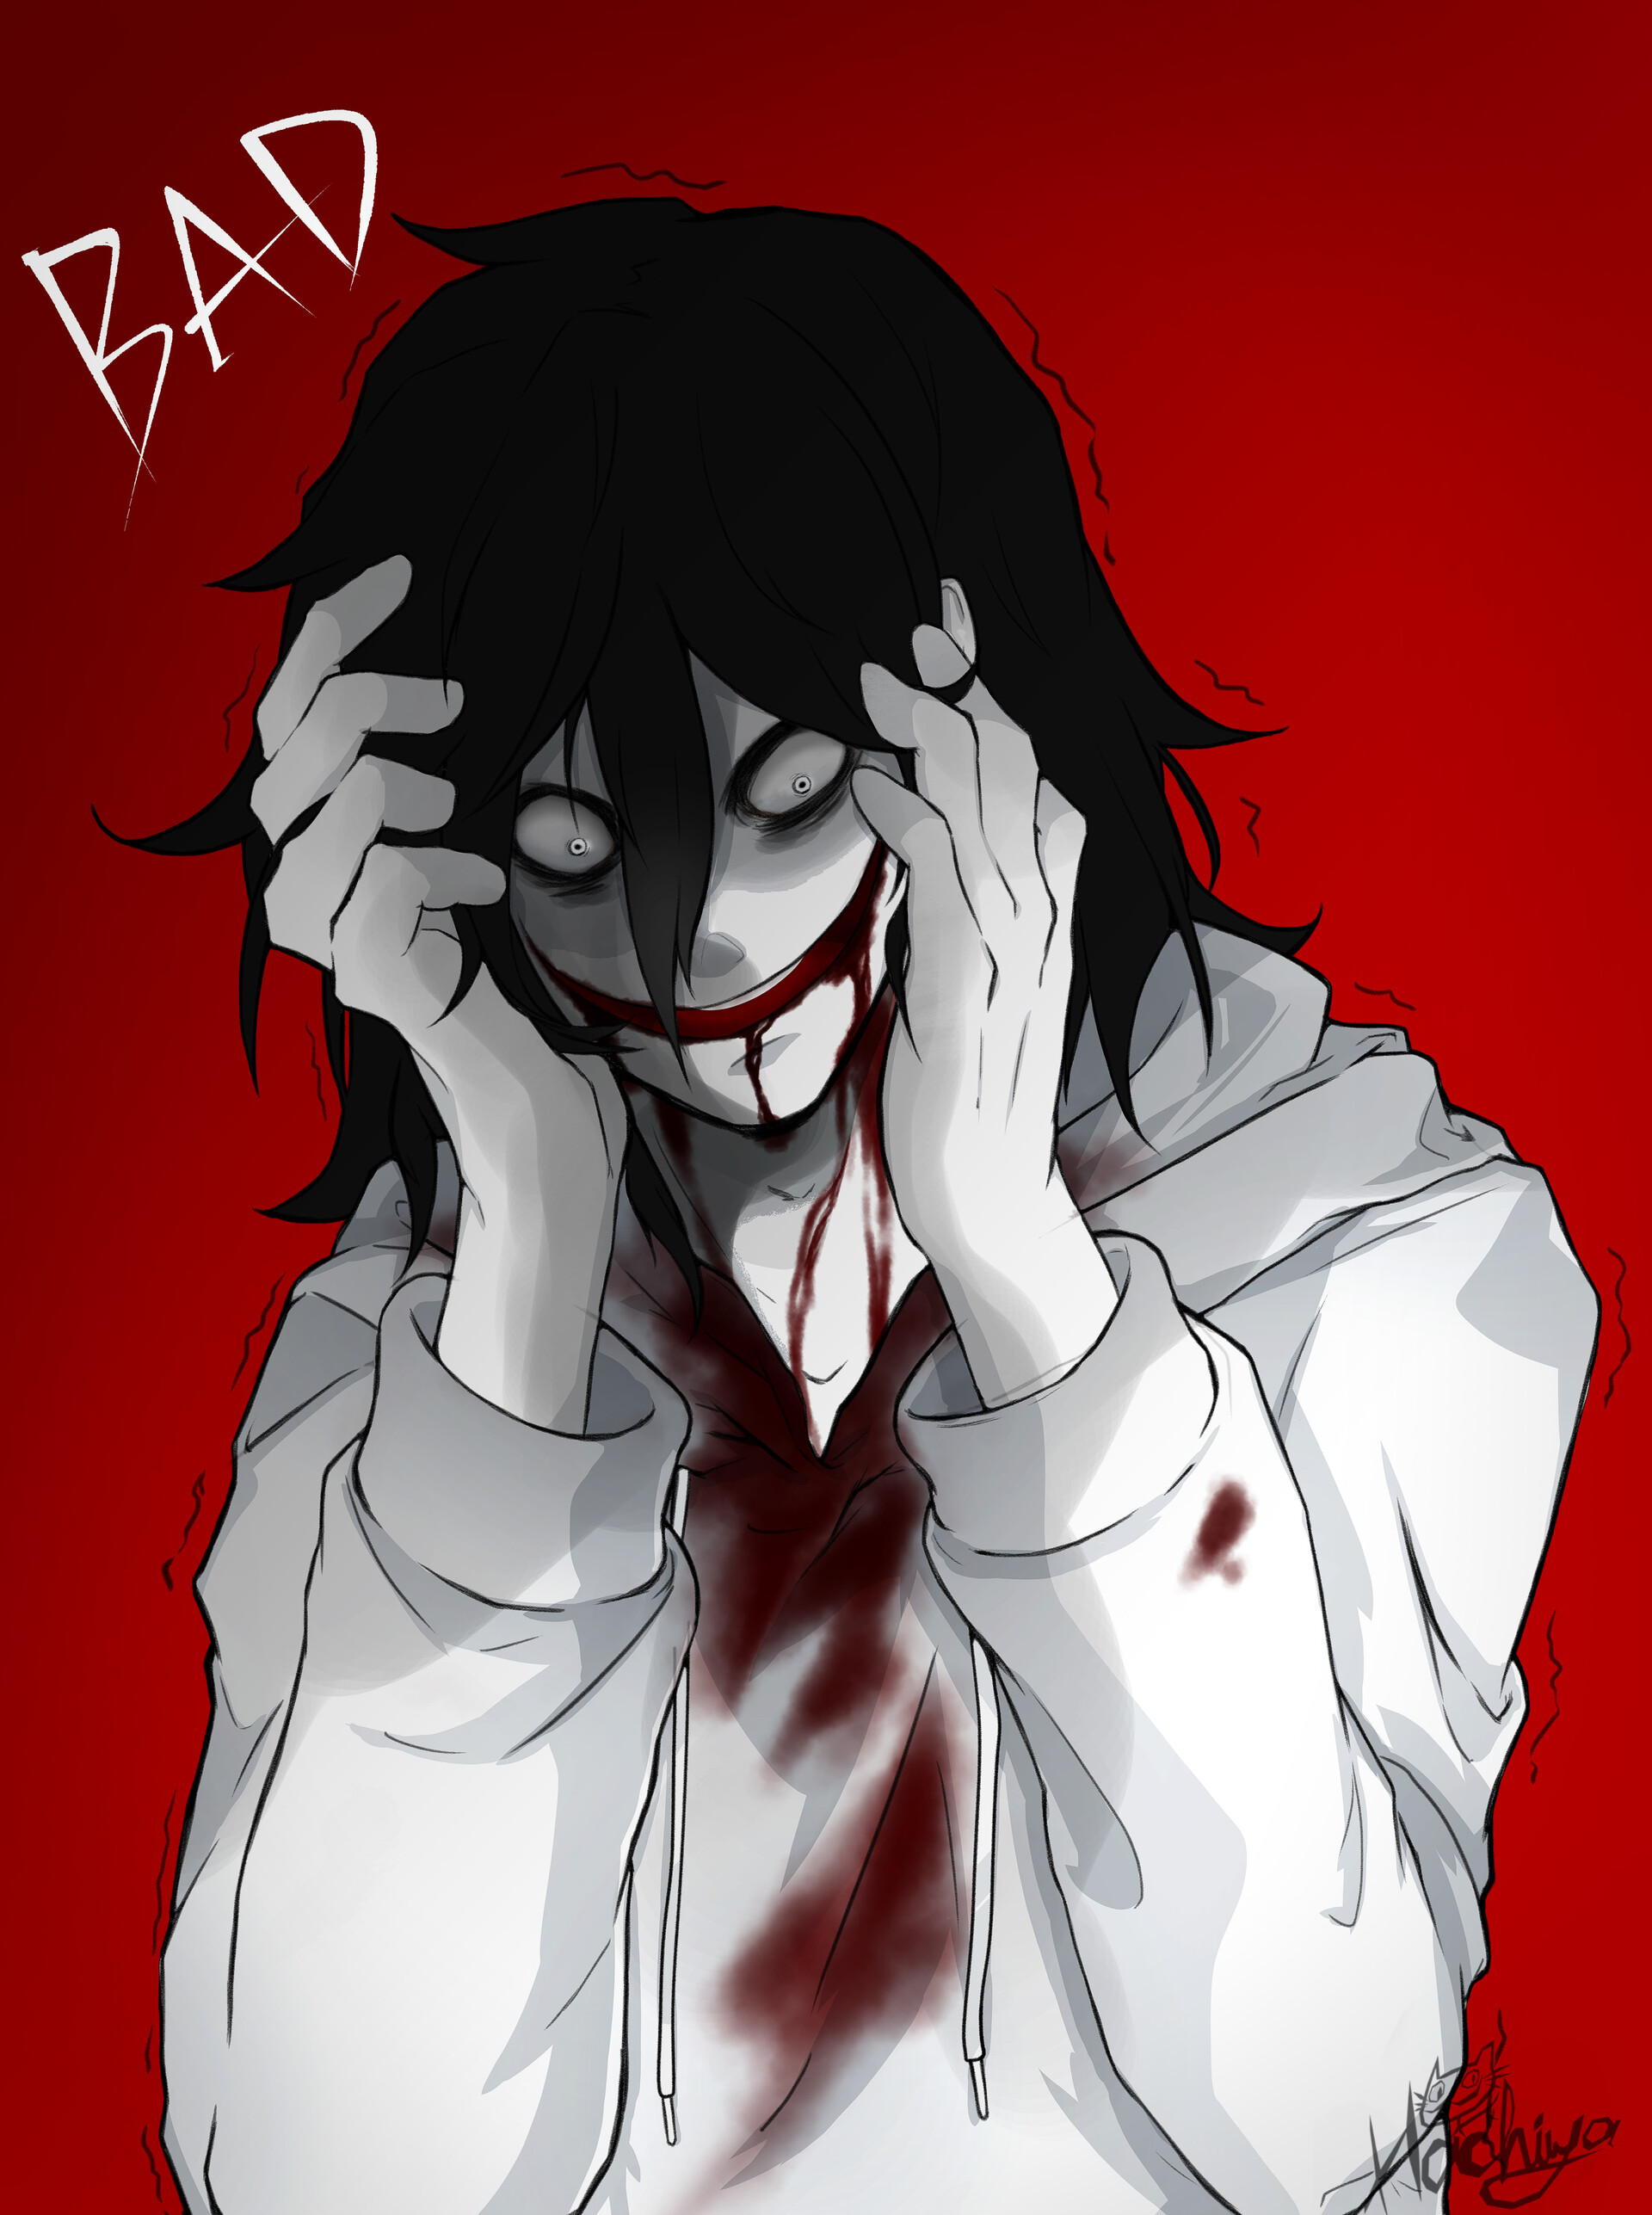 Jeff Lgbt - Jeff The Killer Anime Cute PNG Image | Transparent PNG Free  Download on SeekPNG